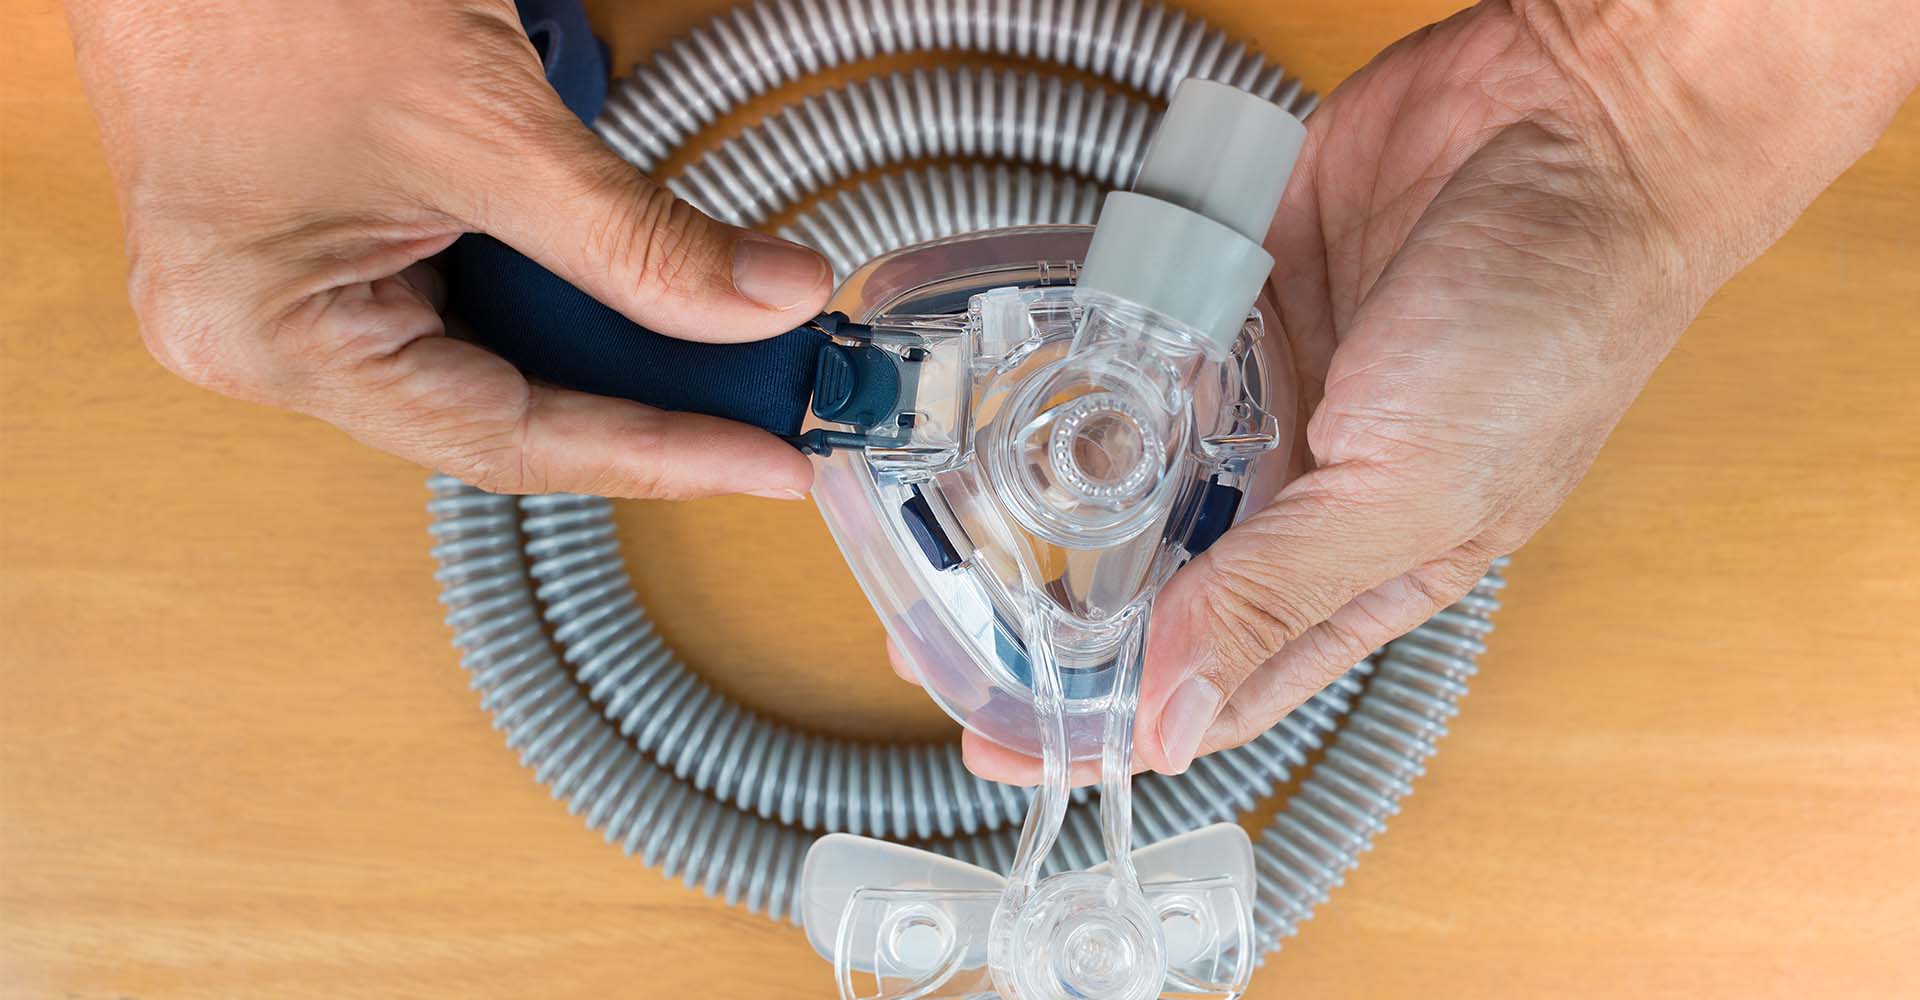 inspecting a cpap and hose